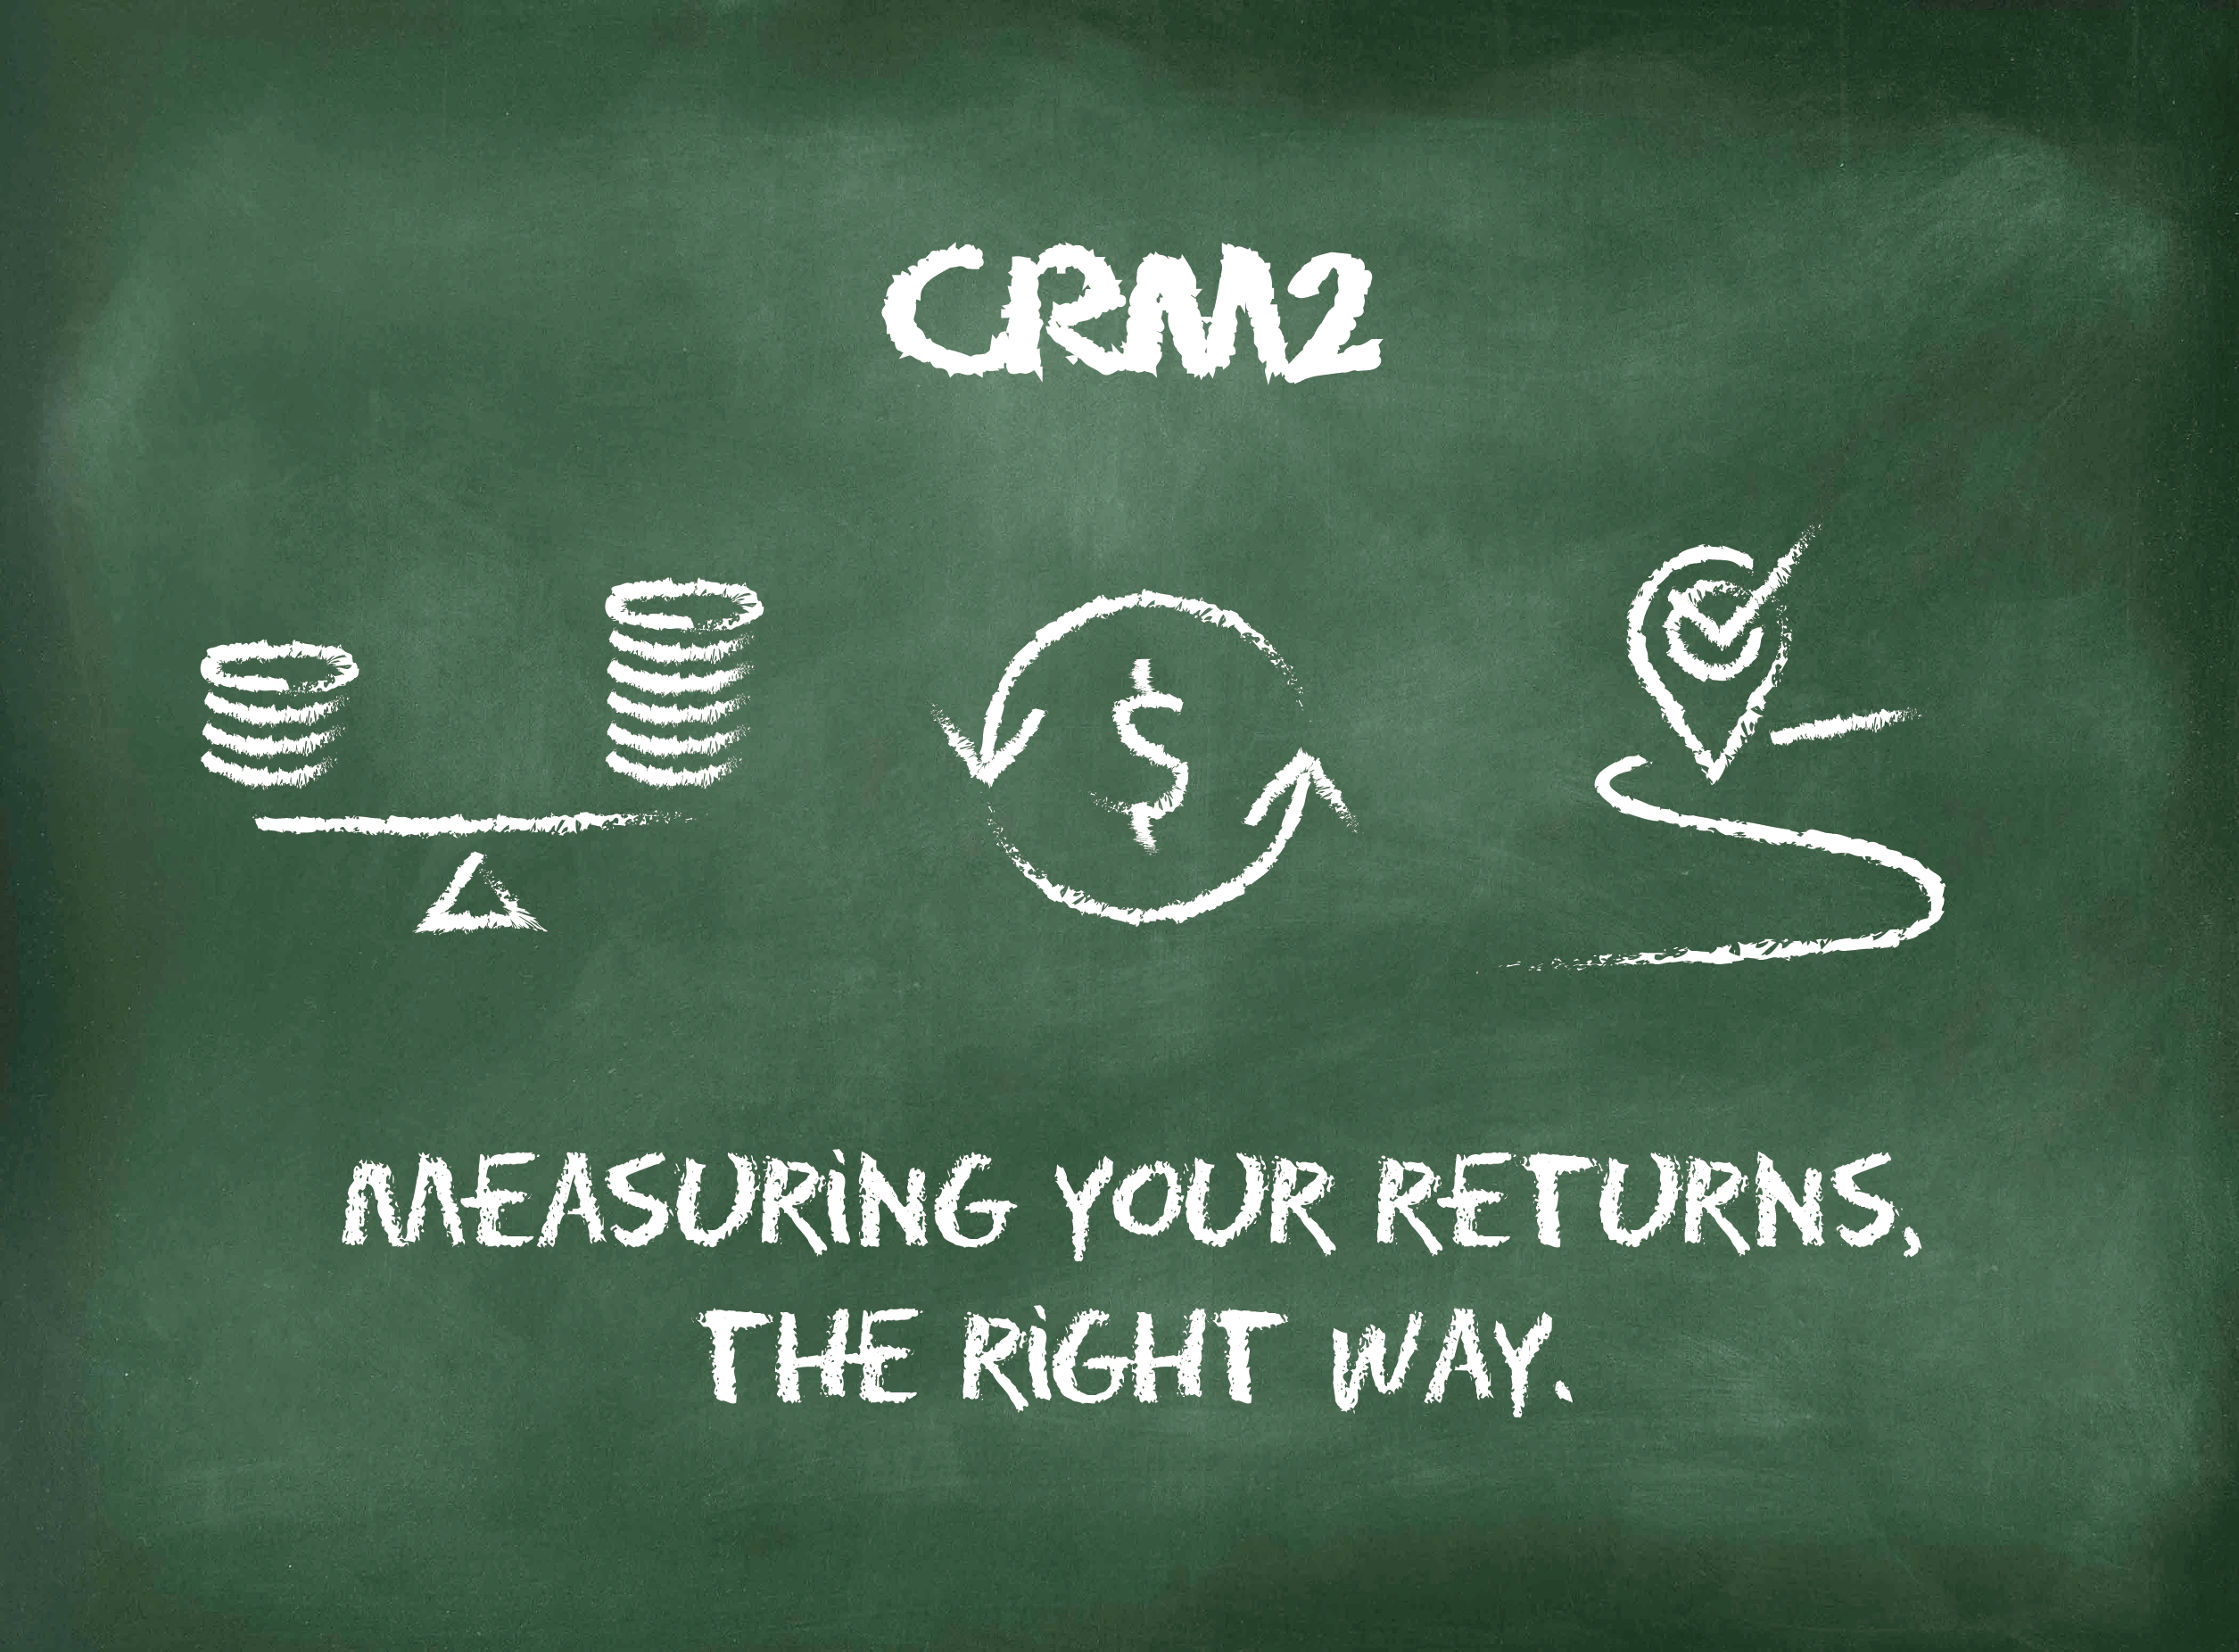 CRM2: Measuring Your Returns, The Right Way